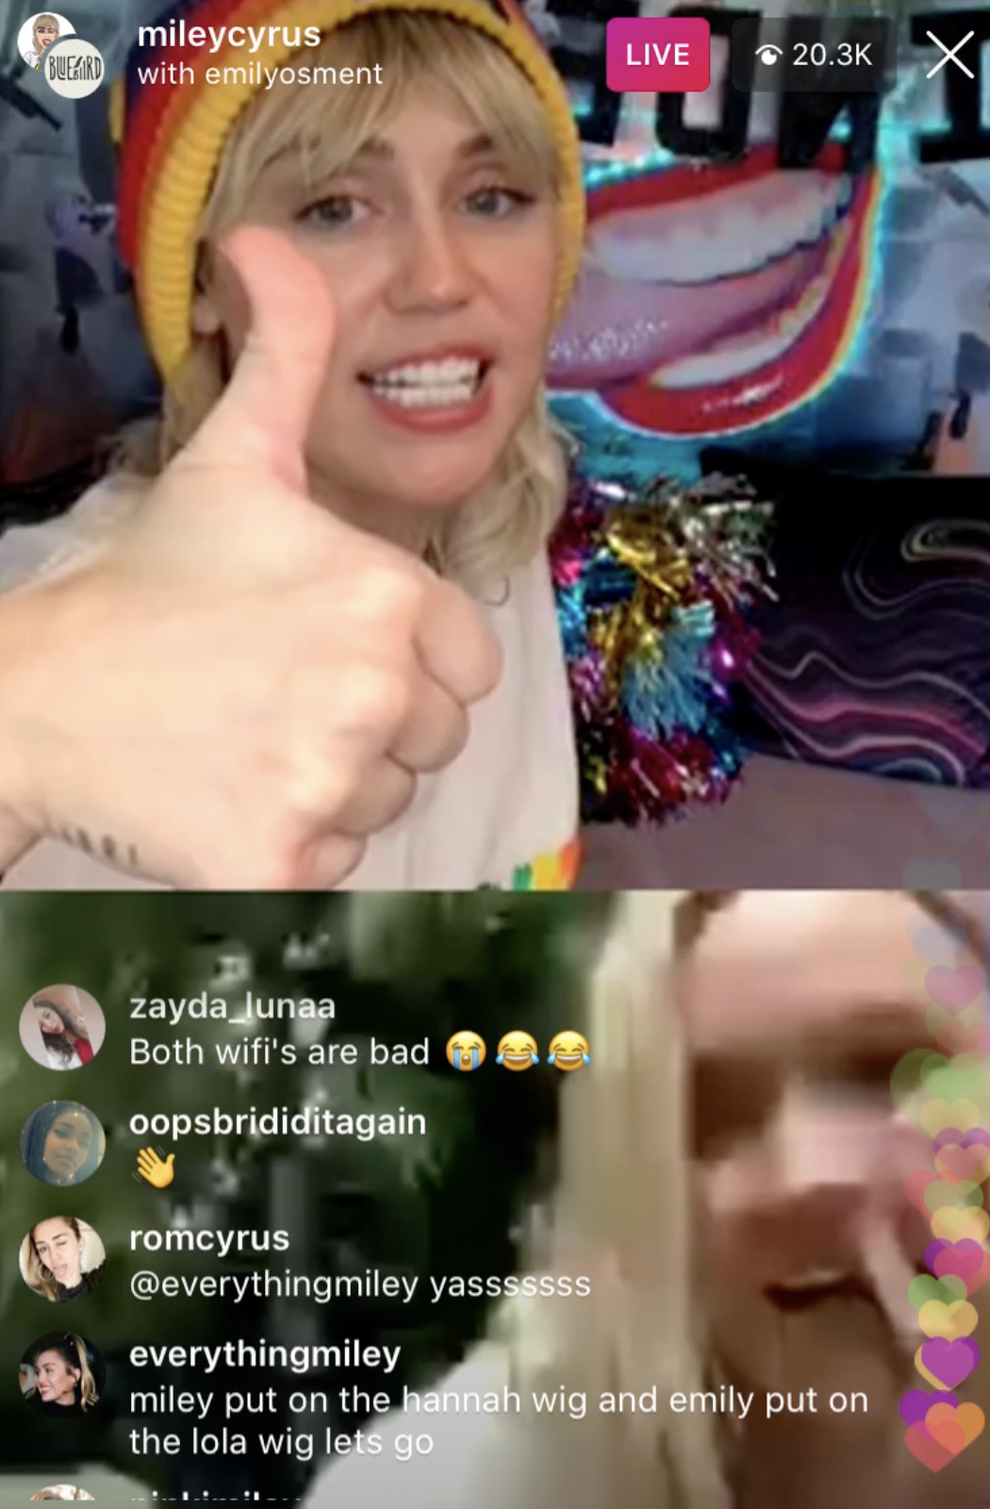 Emily Osment Miley Cyrus - Miley Cyrus And Emily Osment Reunited On Instagram Live